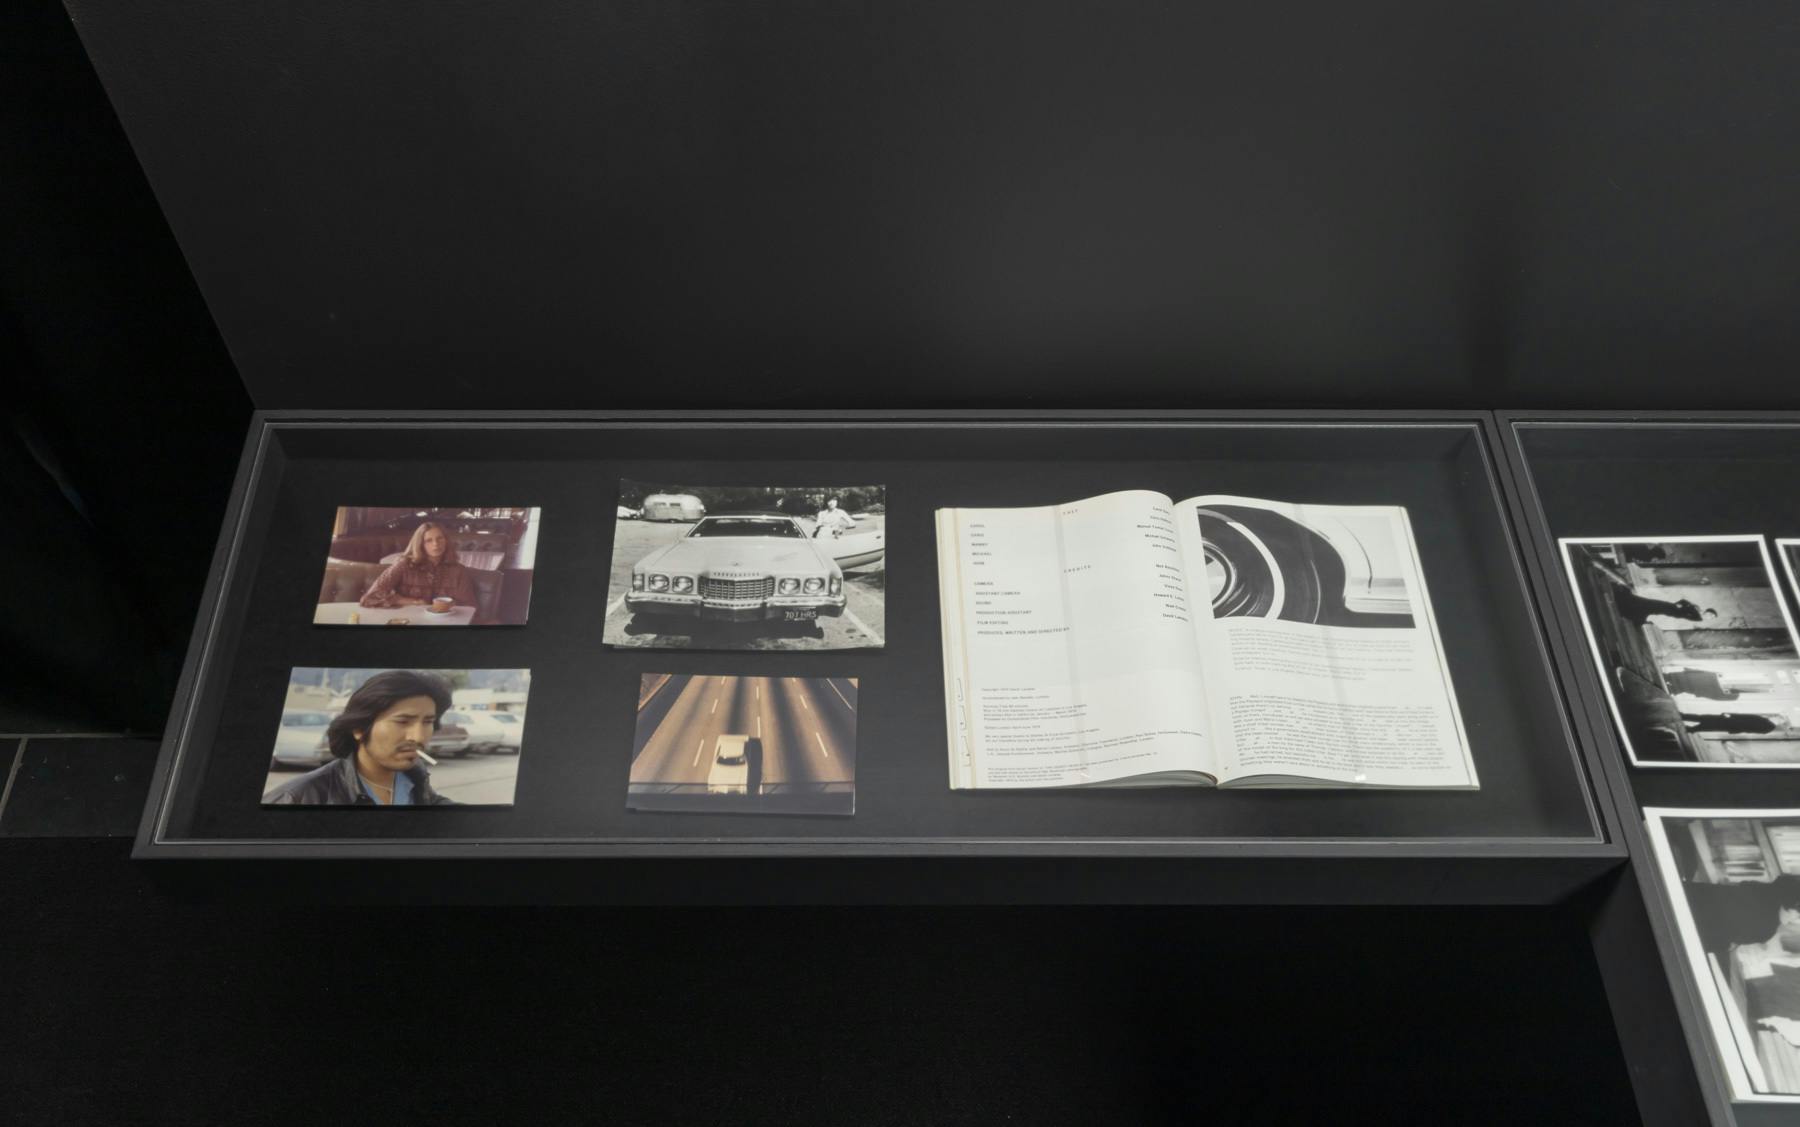 Installation view of a vitrine with archival photographs and documents.